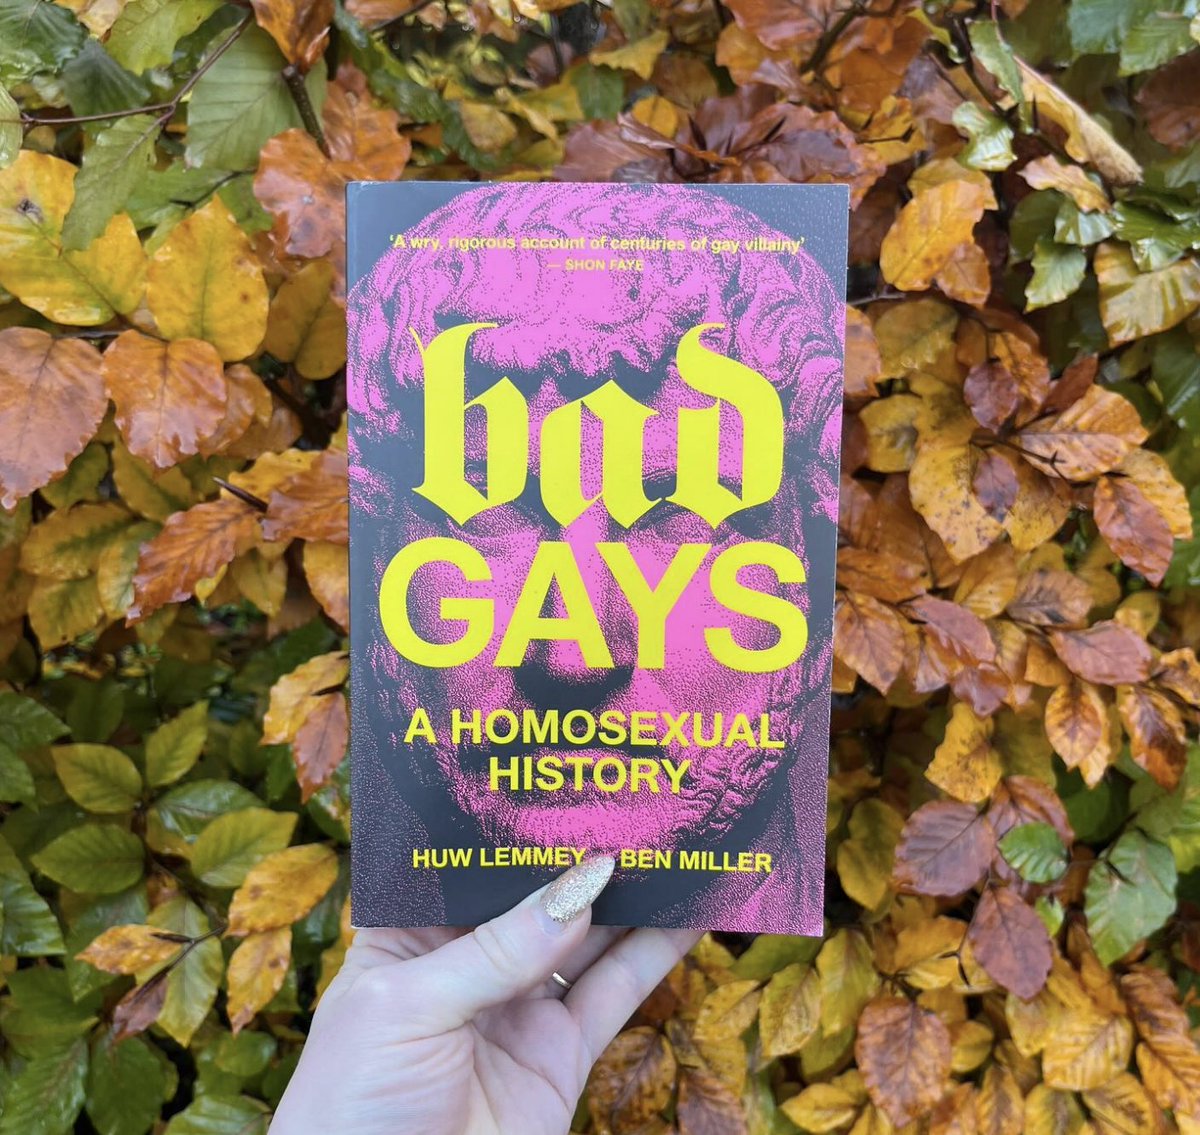 Our next meeting is Tuesday 12th December, 7.30-9pm @OctoberBooks. Join us to discuss chaper 14 of @huwlemmey and @benwritesthings' 'Bad Gays: A Homosexual History'